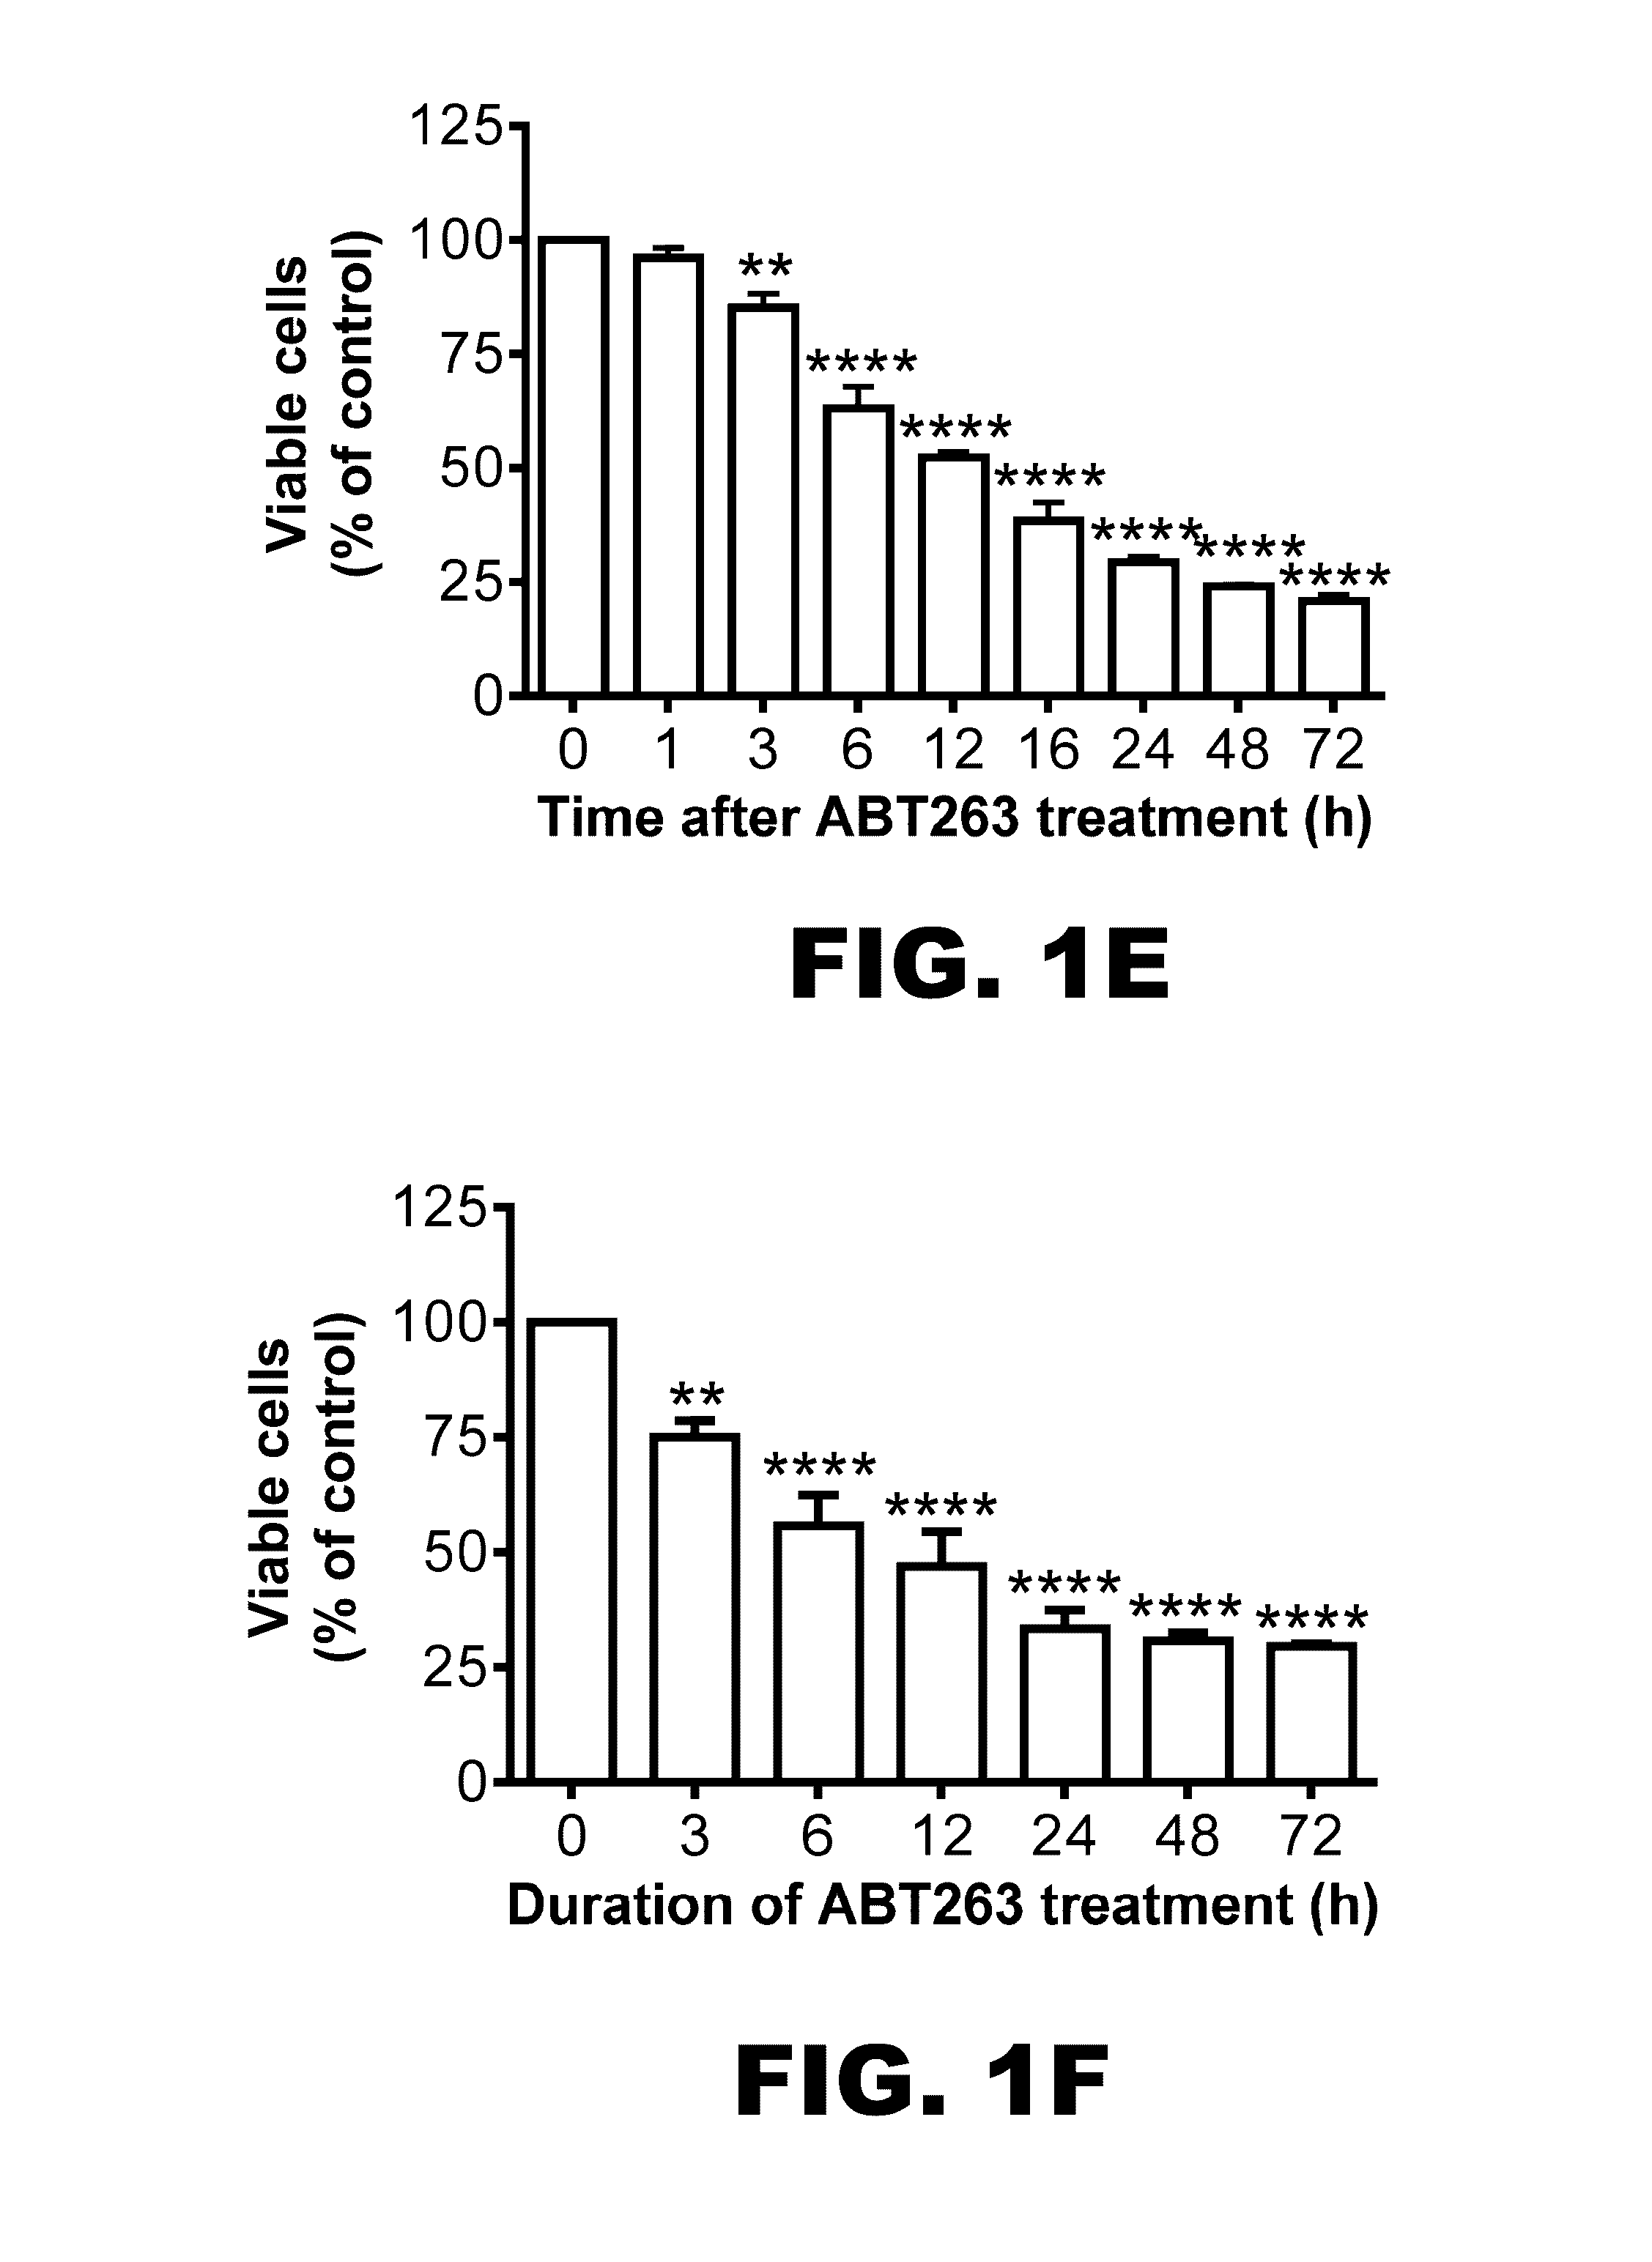 COMPOSITIONS AND METHODS FOR INHIBITING ANTIAPOPTOTIC Bcl-2 PROTEINS AS ANTI-AGING AGENTS